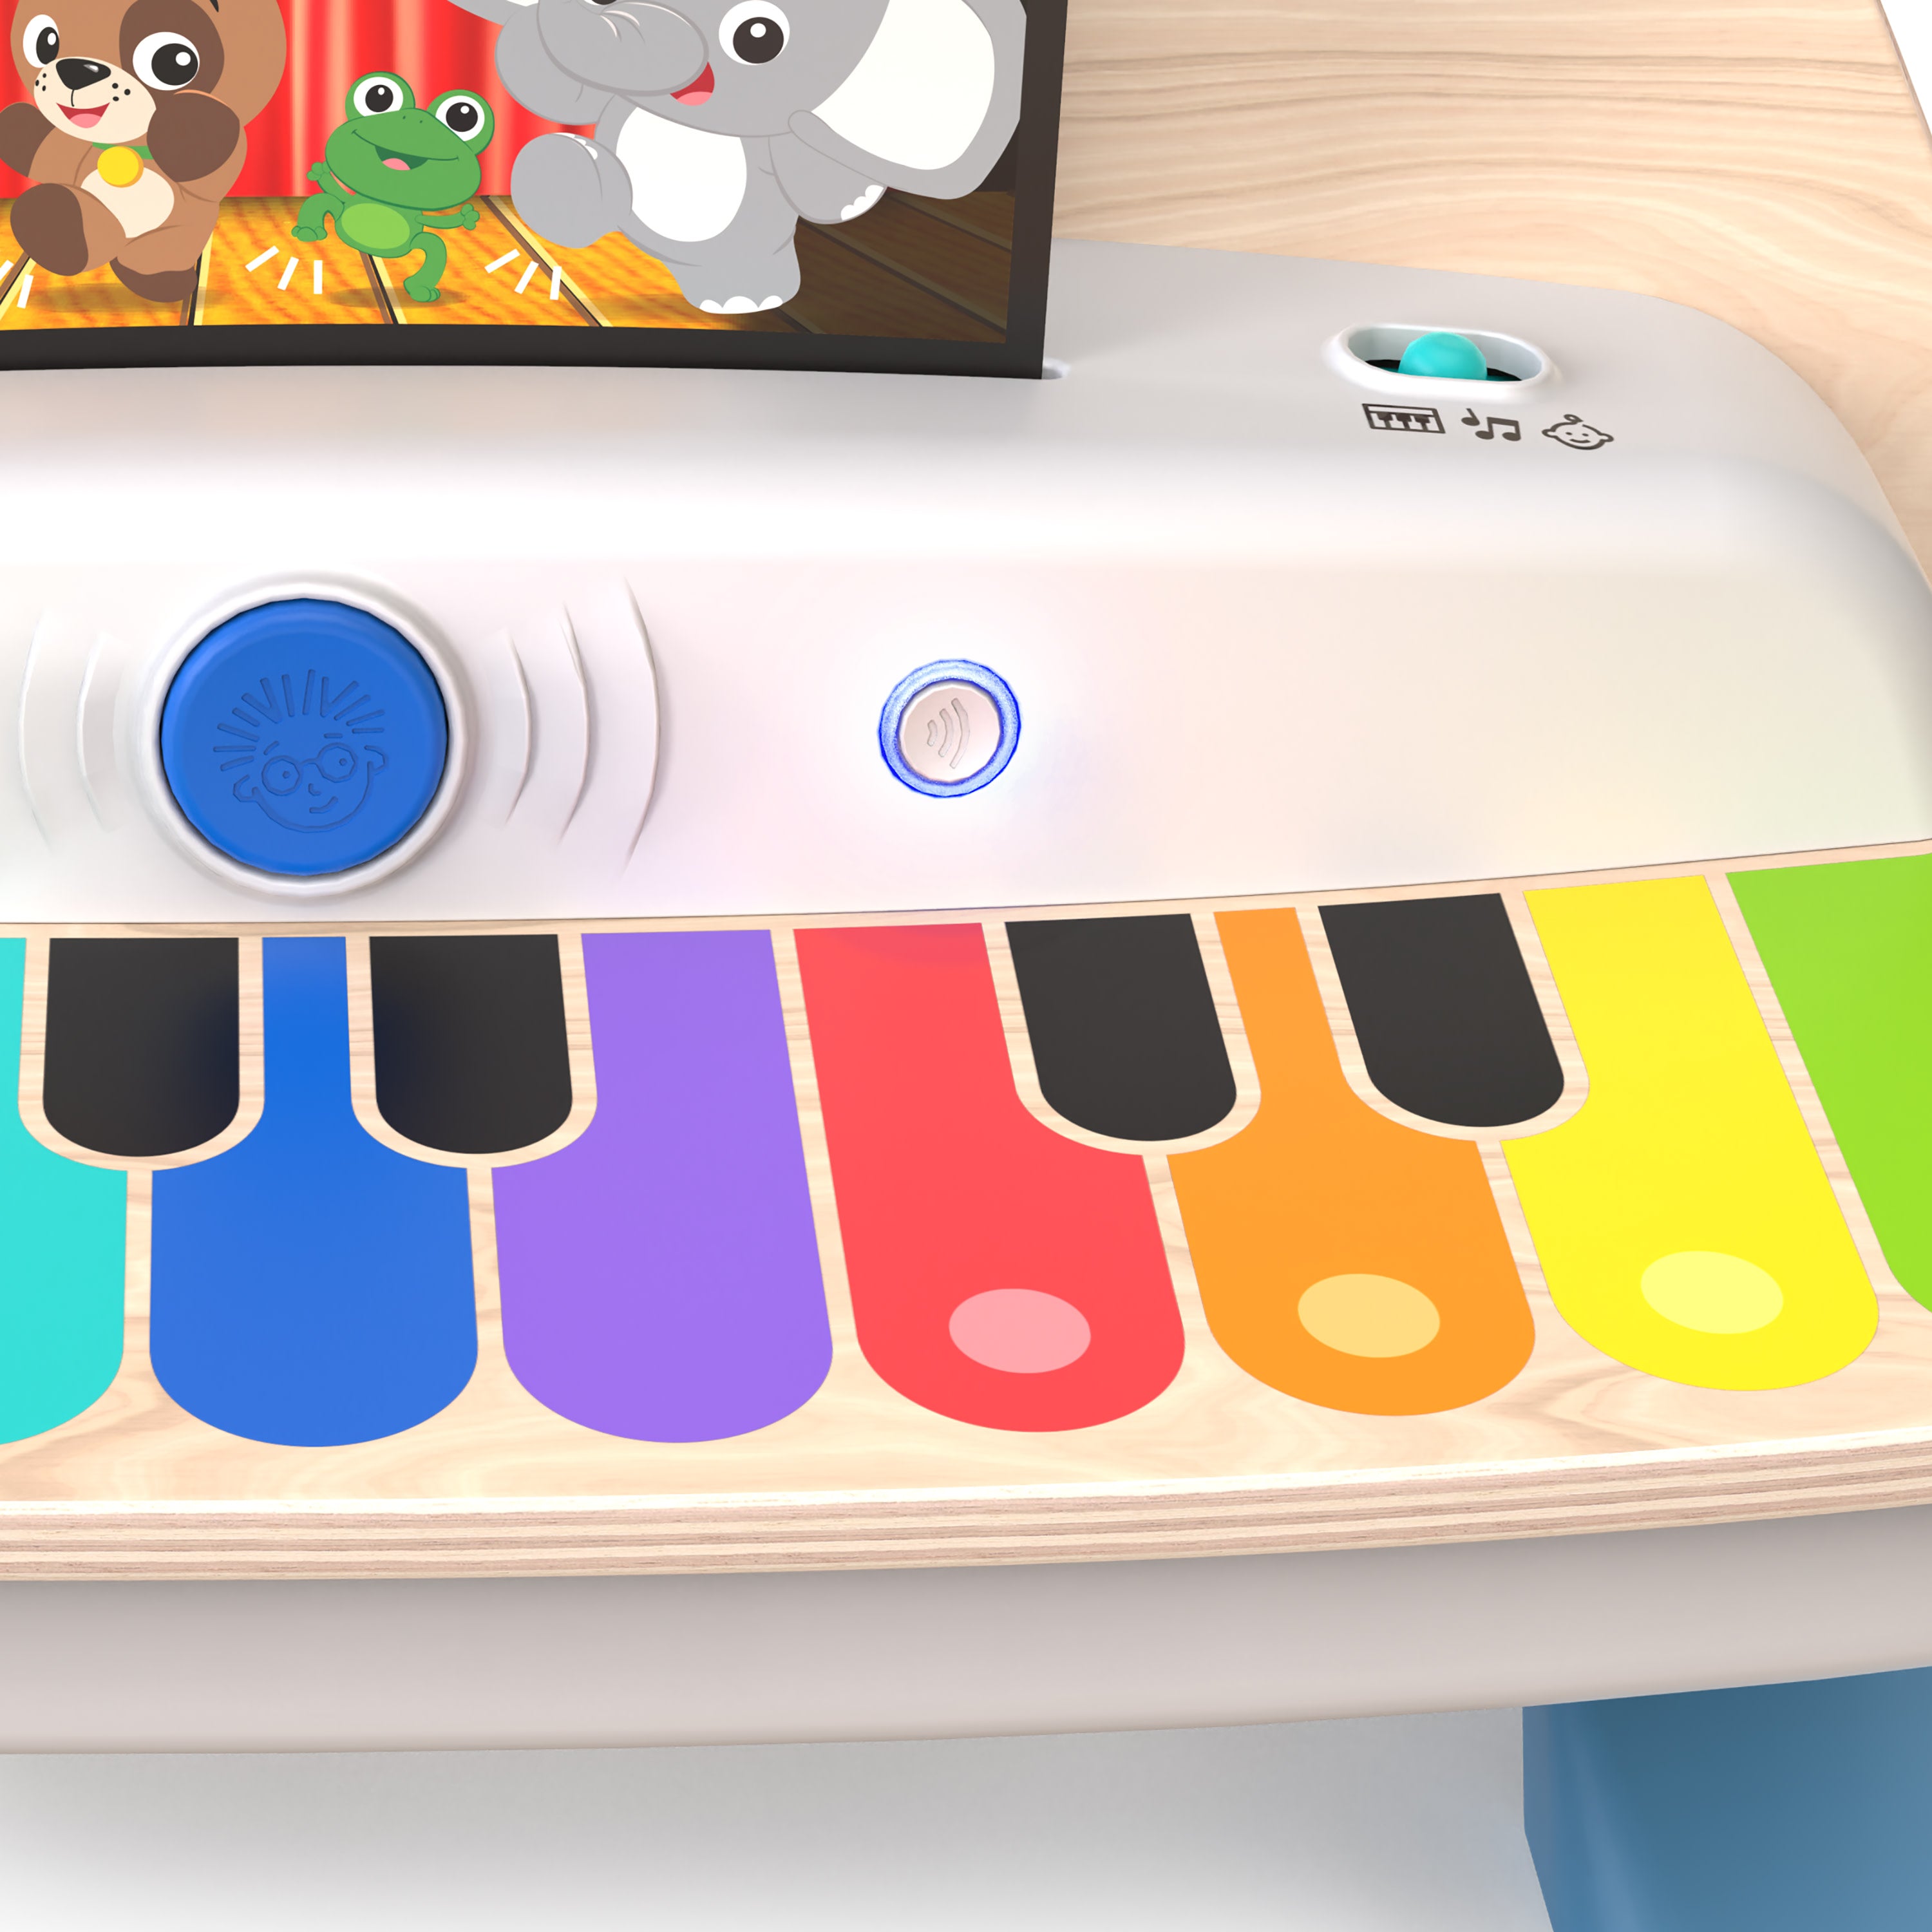 Happy Birthday from our Hape Baby Einstein Magic Touch Piano